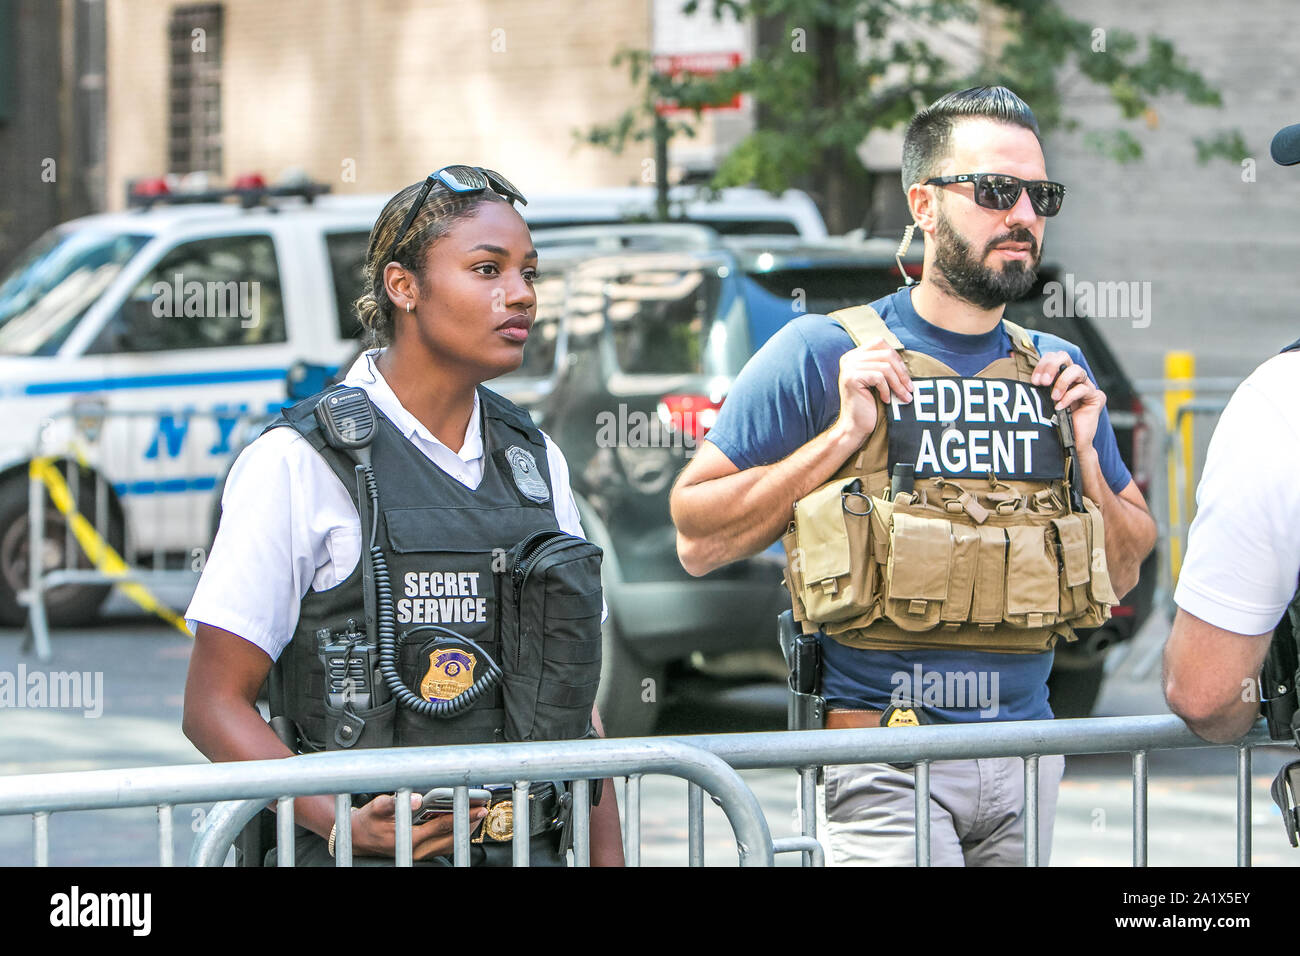 New York City, 9/27/2019: US federal agent and a Secret Service agent at a checkpoint in Manhattan during UN General Assembly. Stock Photo